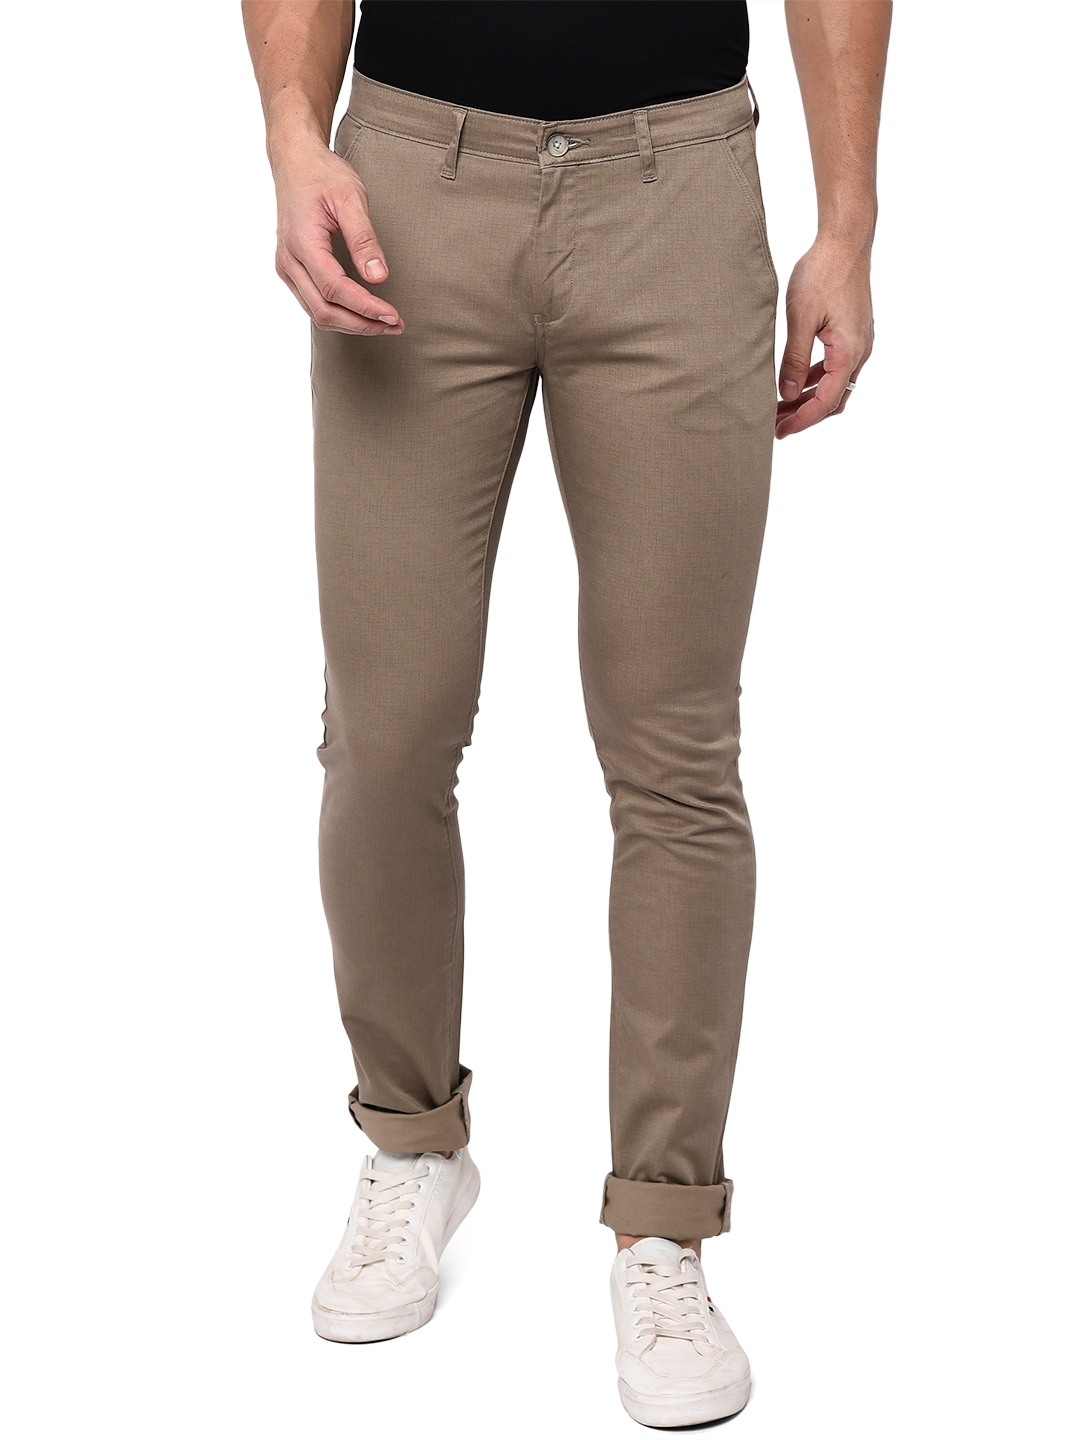 Khaki Washed Slim Fit Casual Trouser | Greenfibre